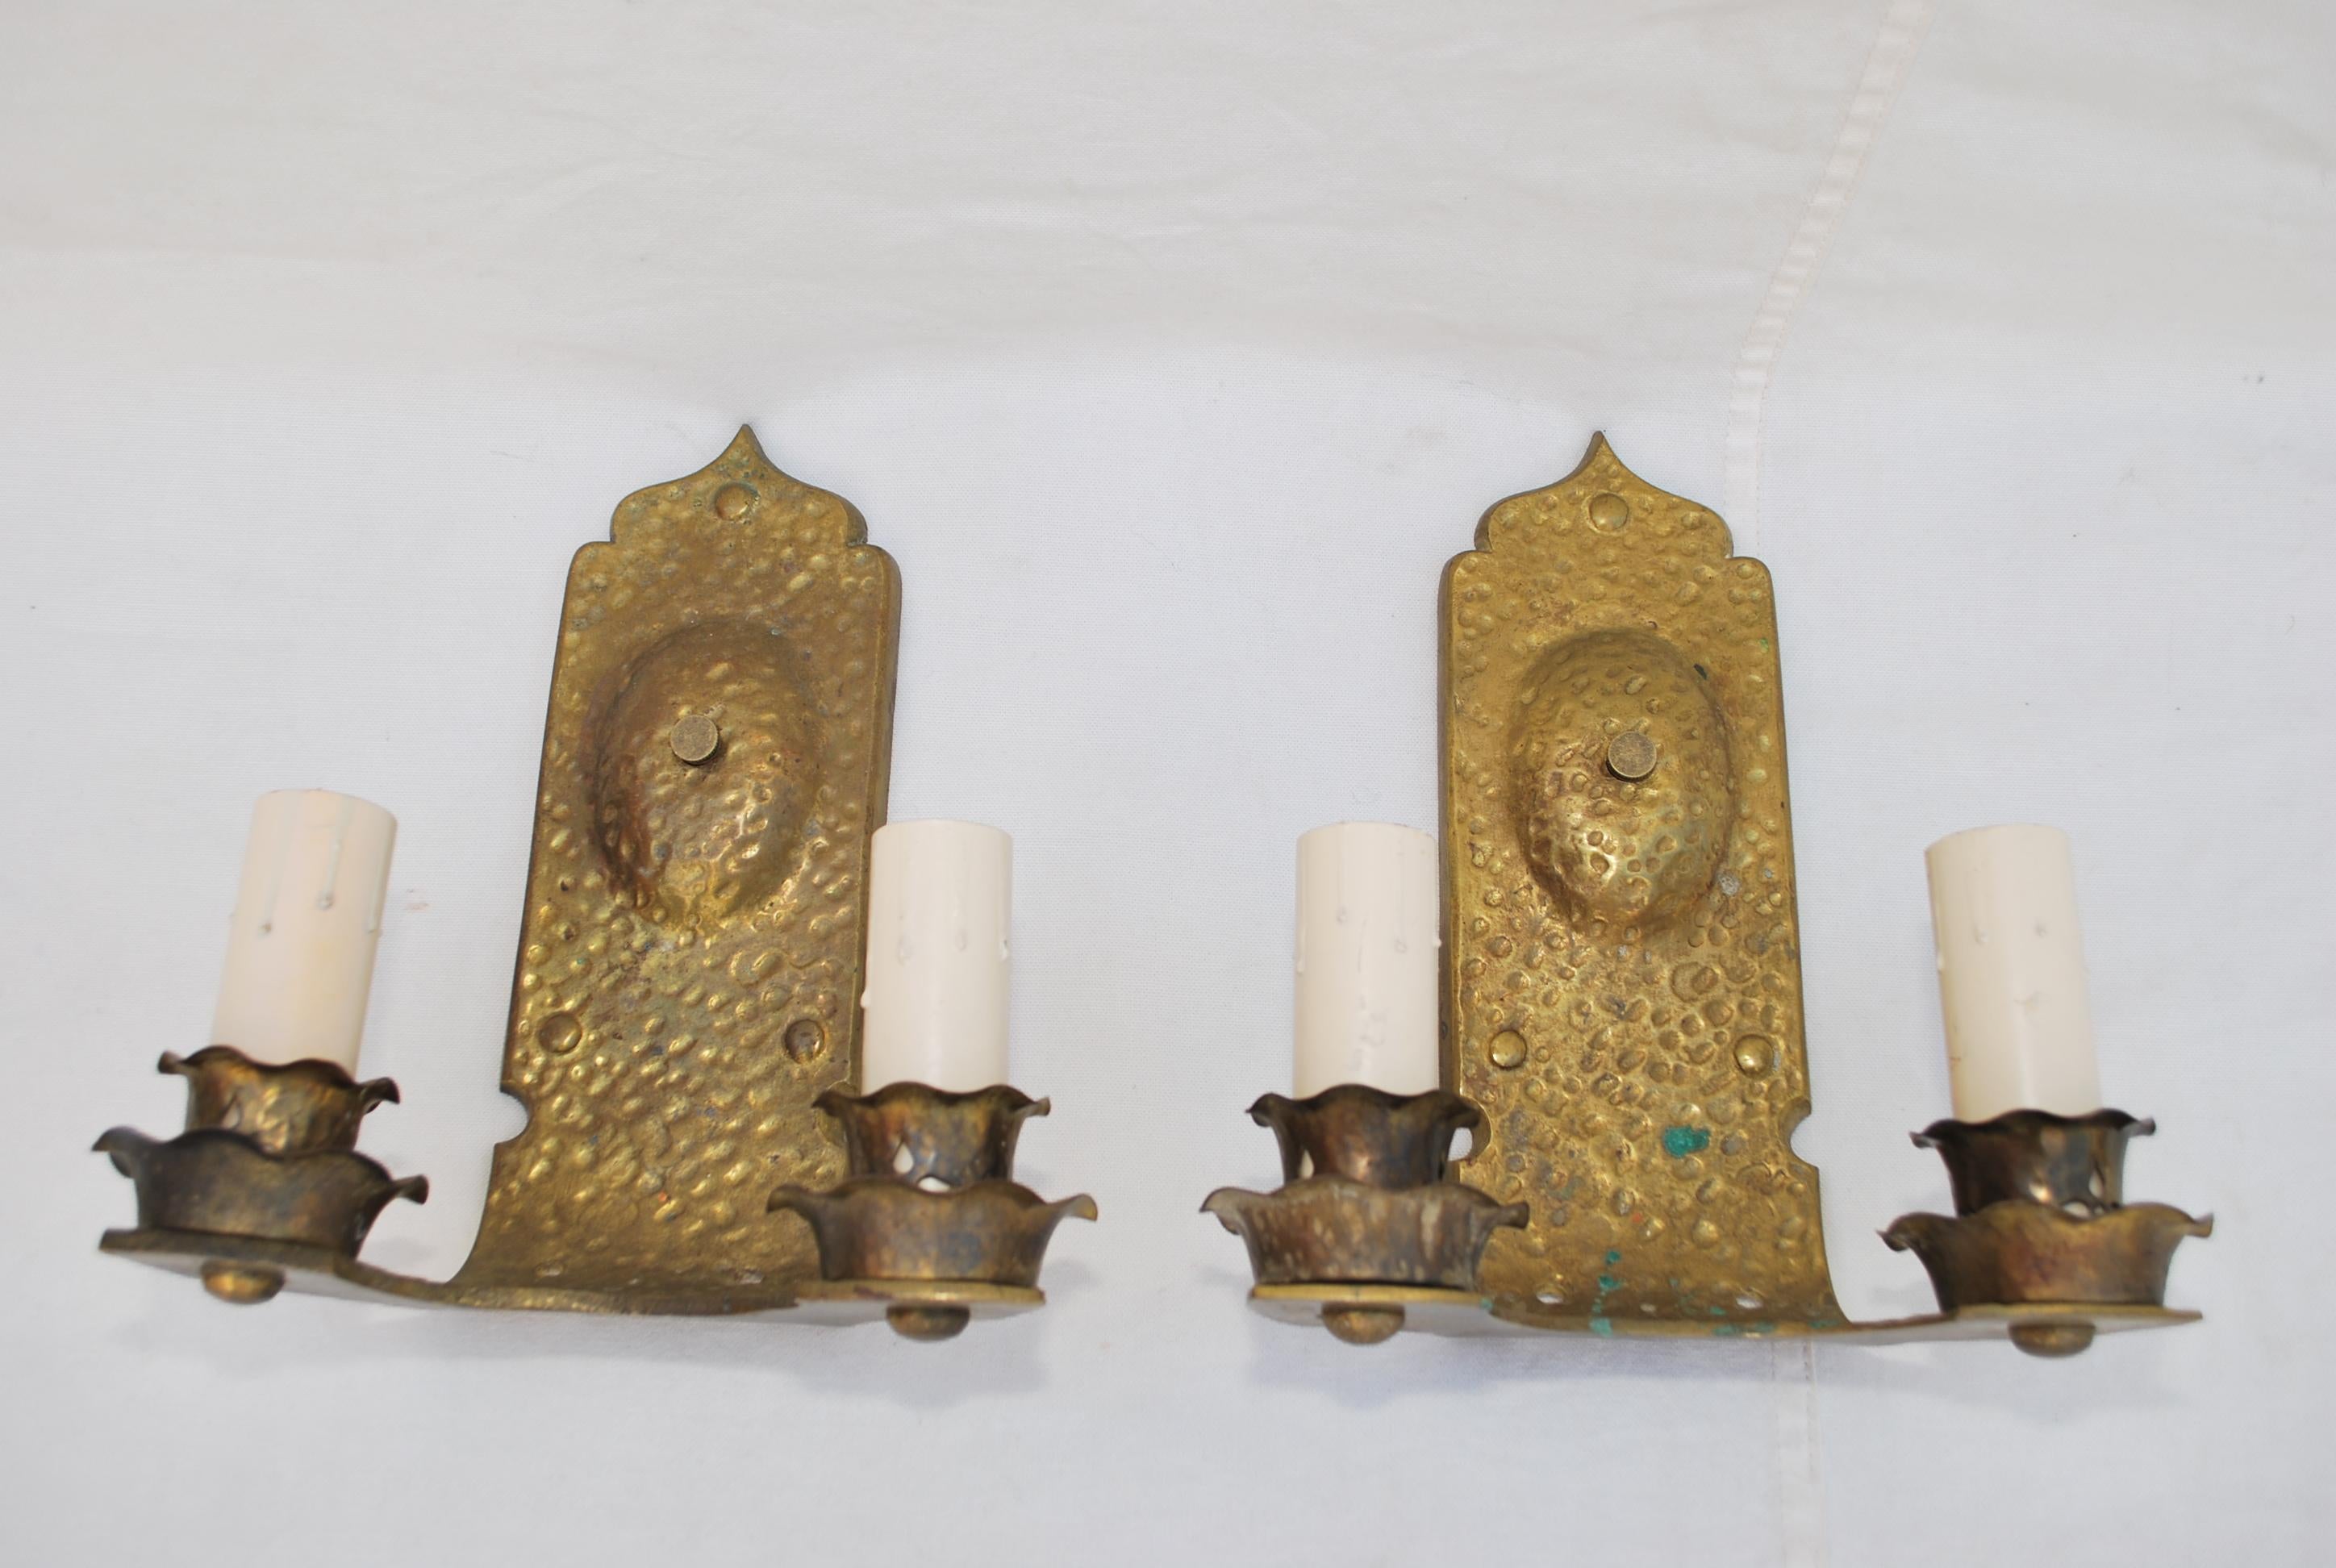 A very nice of turn of the century sconces, they can be in a Arts and craft style home or gothic style